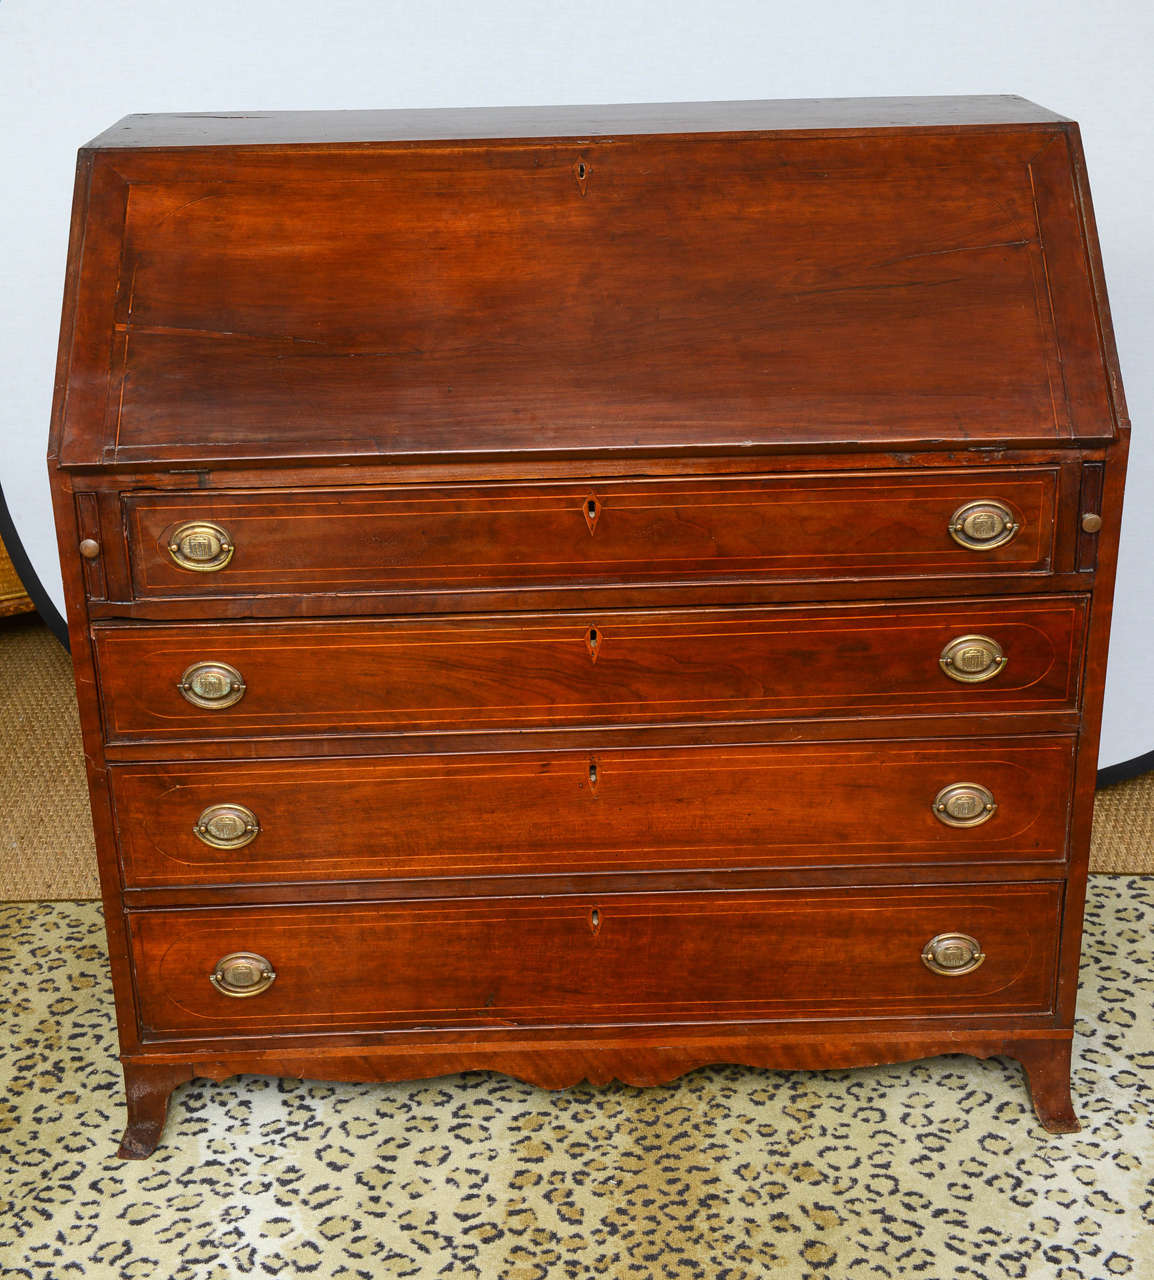 This is a very nice solid mahogany American writing desk bureau. It sits on bracket feet and has satinwood string inlay to the drawers with dove tails joints and solid oak drawer linings ,also with solid brass handles which may have been replaced